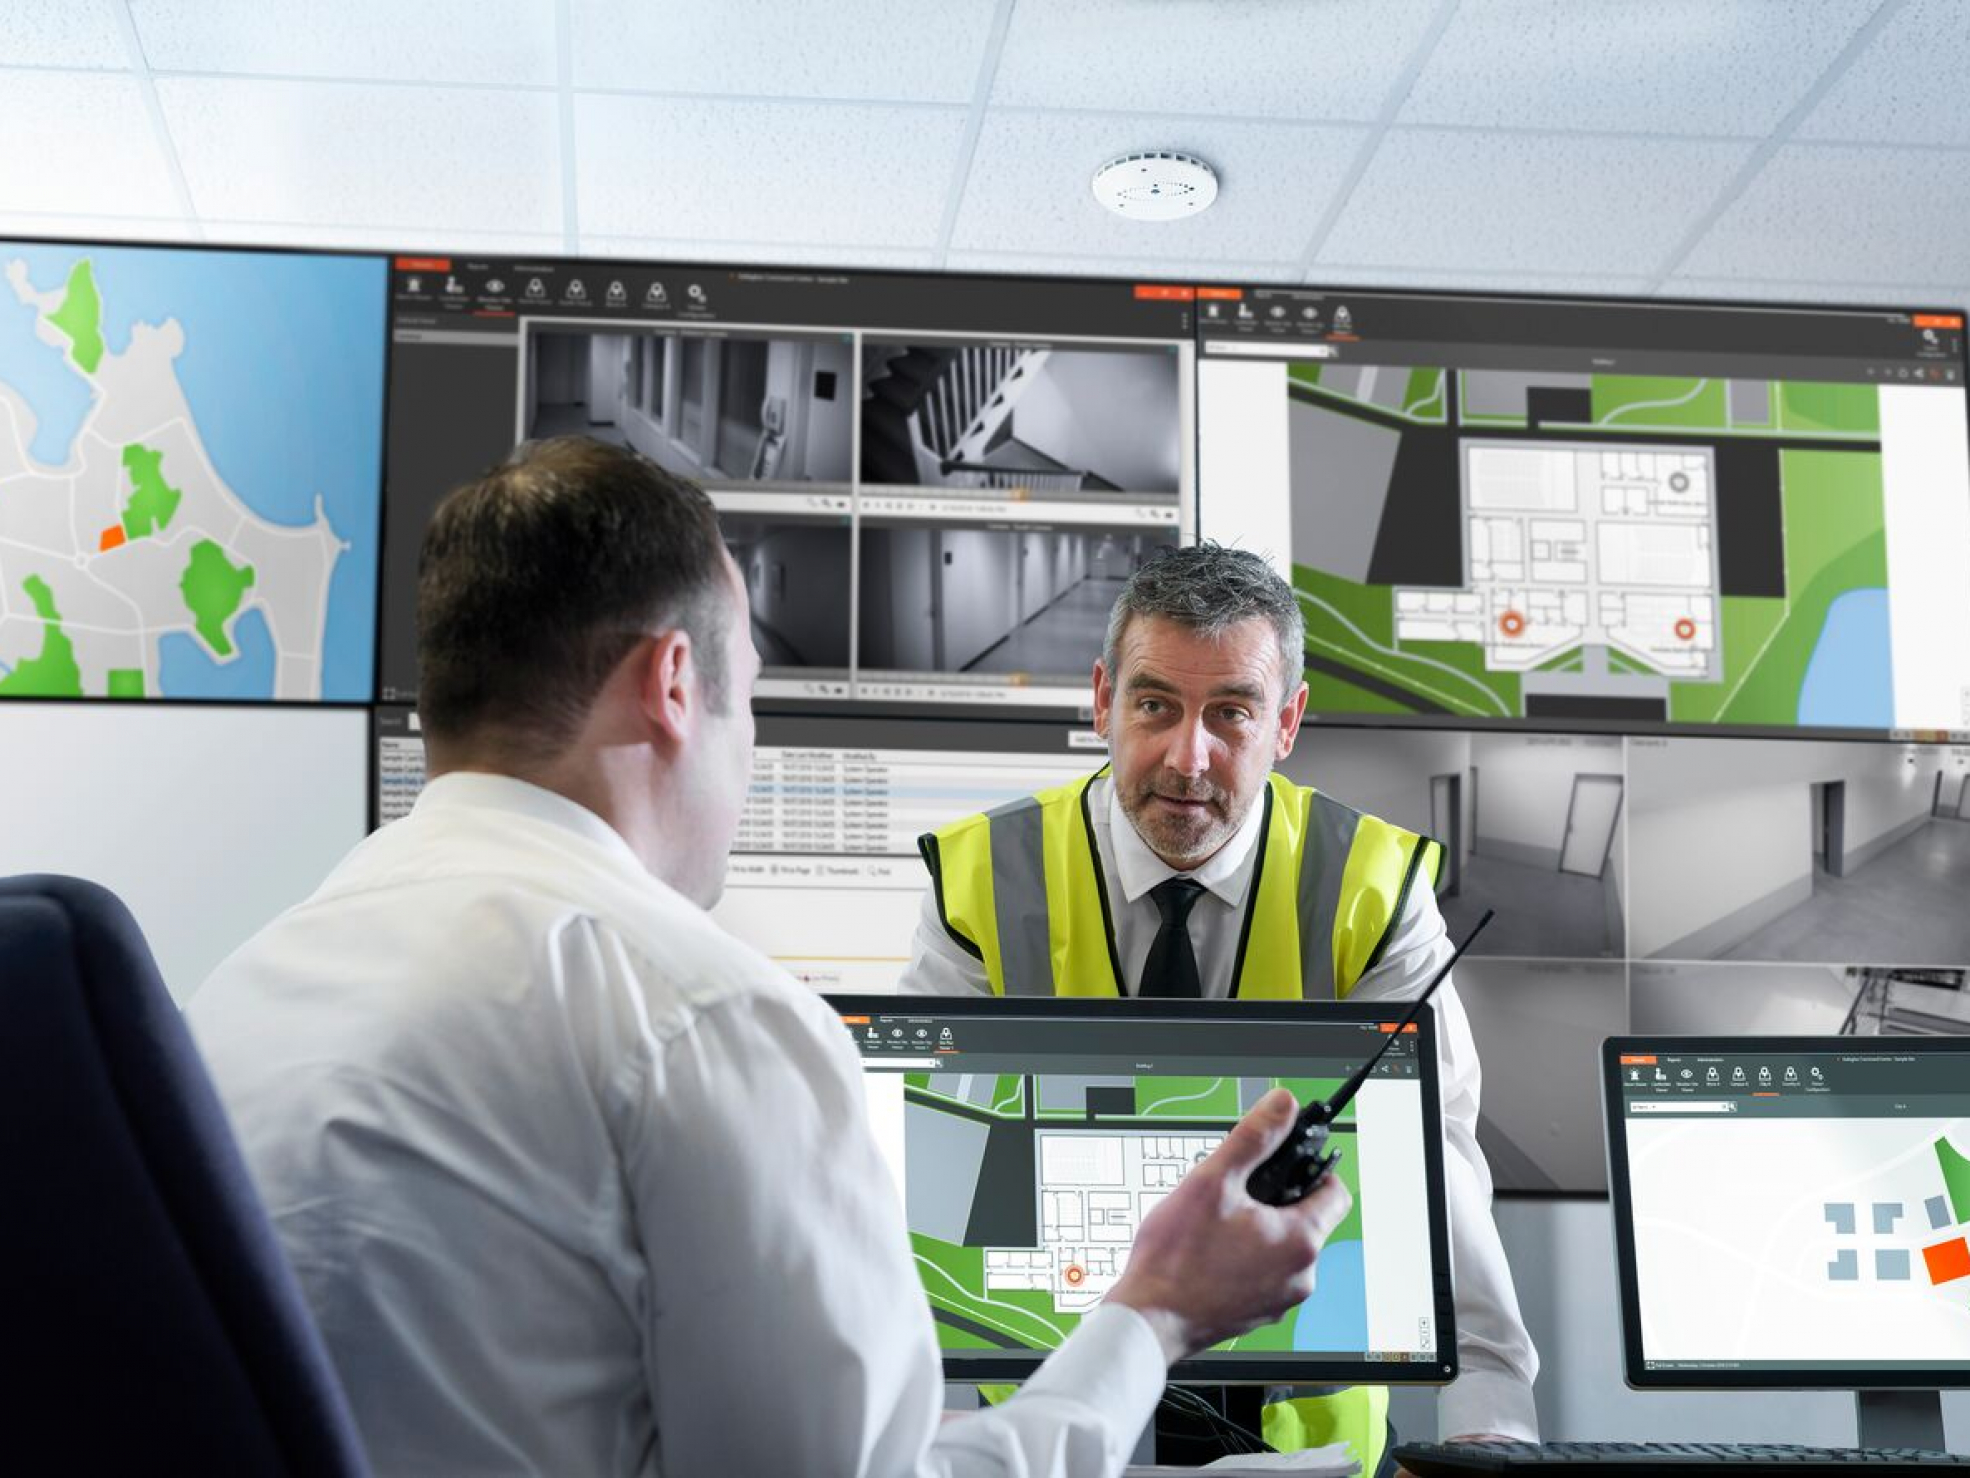 The latest version of Gallagher’s award-winning site management software, Command Centre, has been released to market, providing customers with enhanced efficiency and site protection for a safer tomorrow.